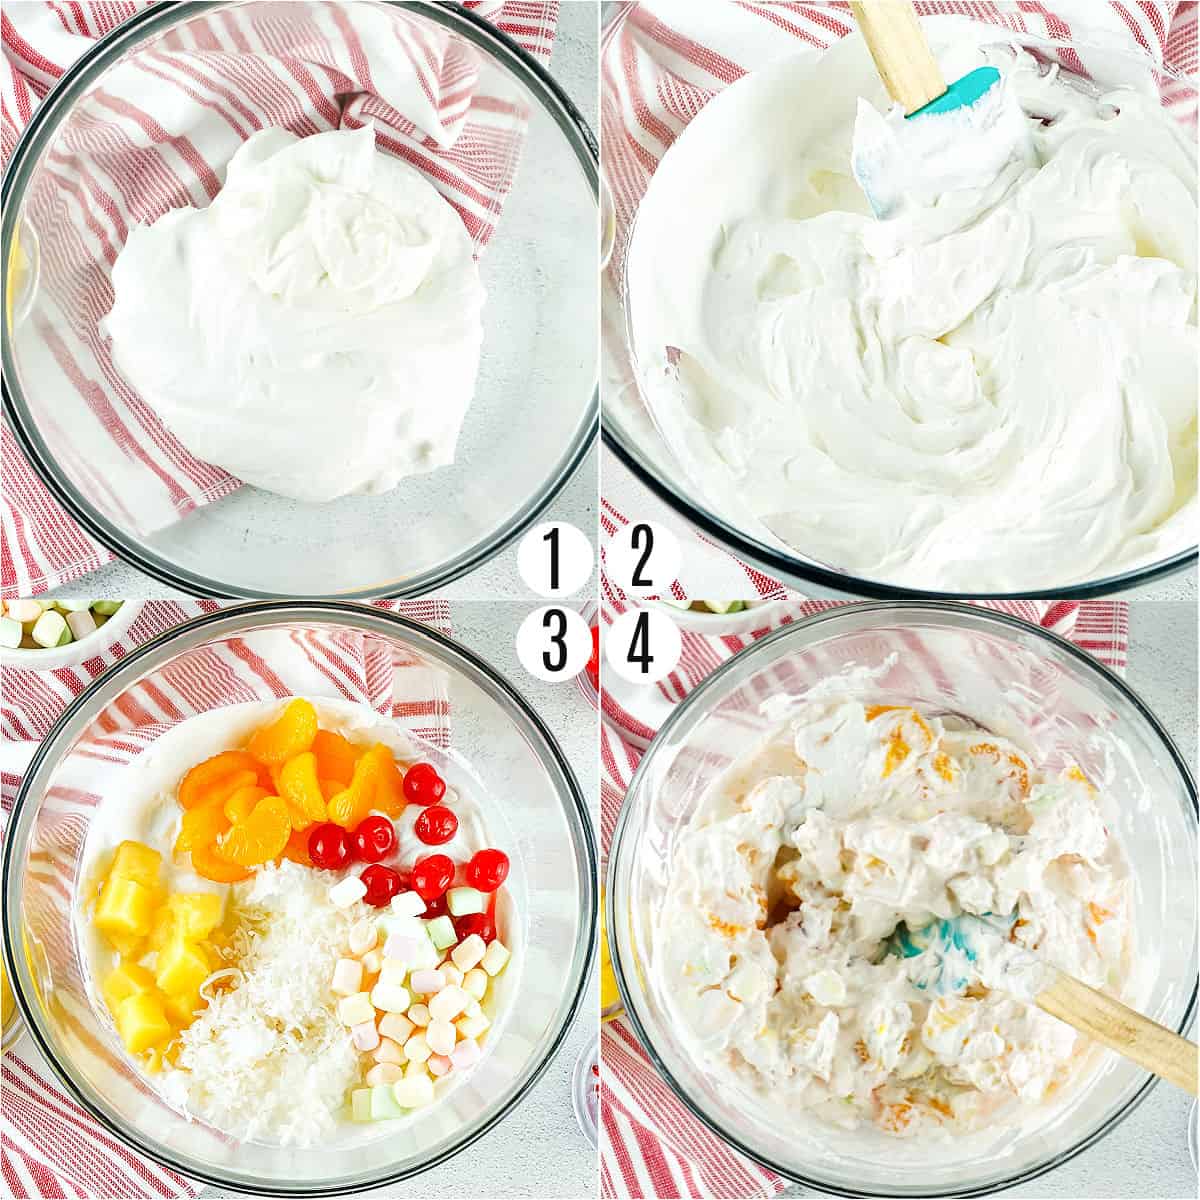 Step by step photos showing how to make ambrosia salad.